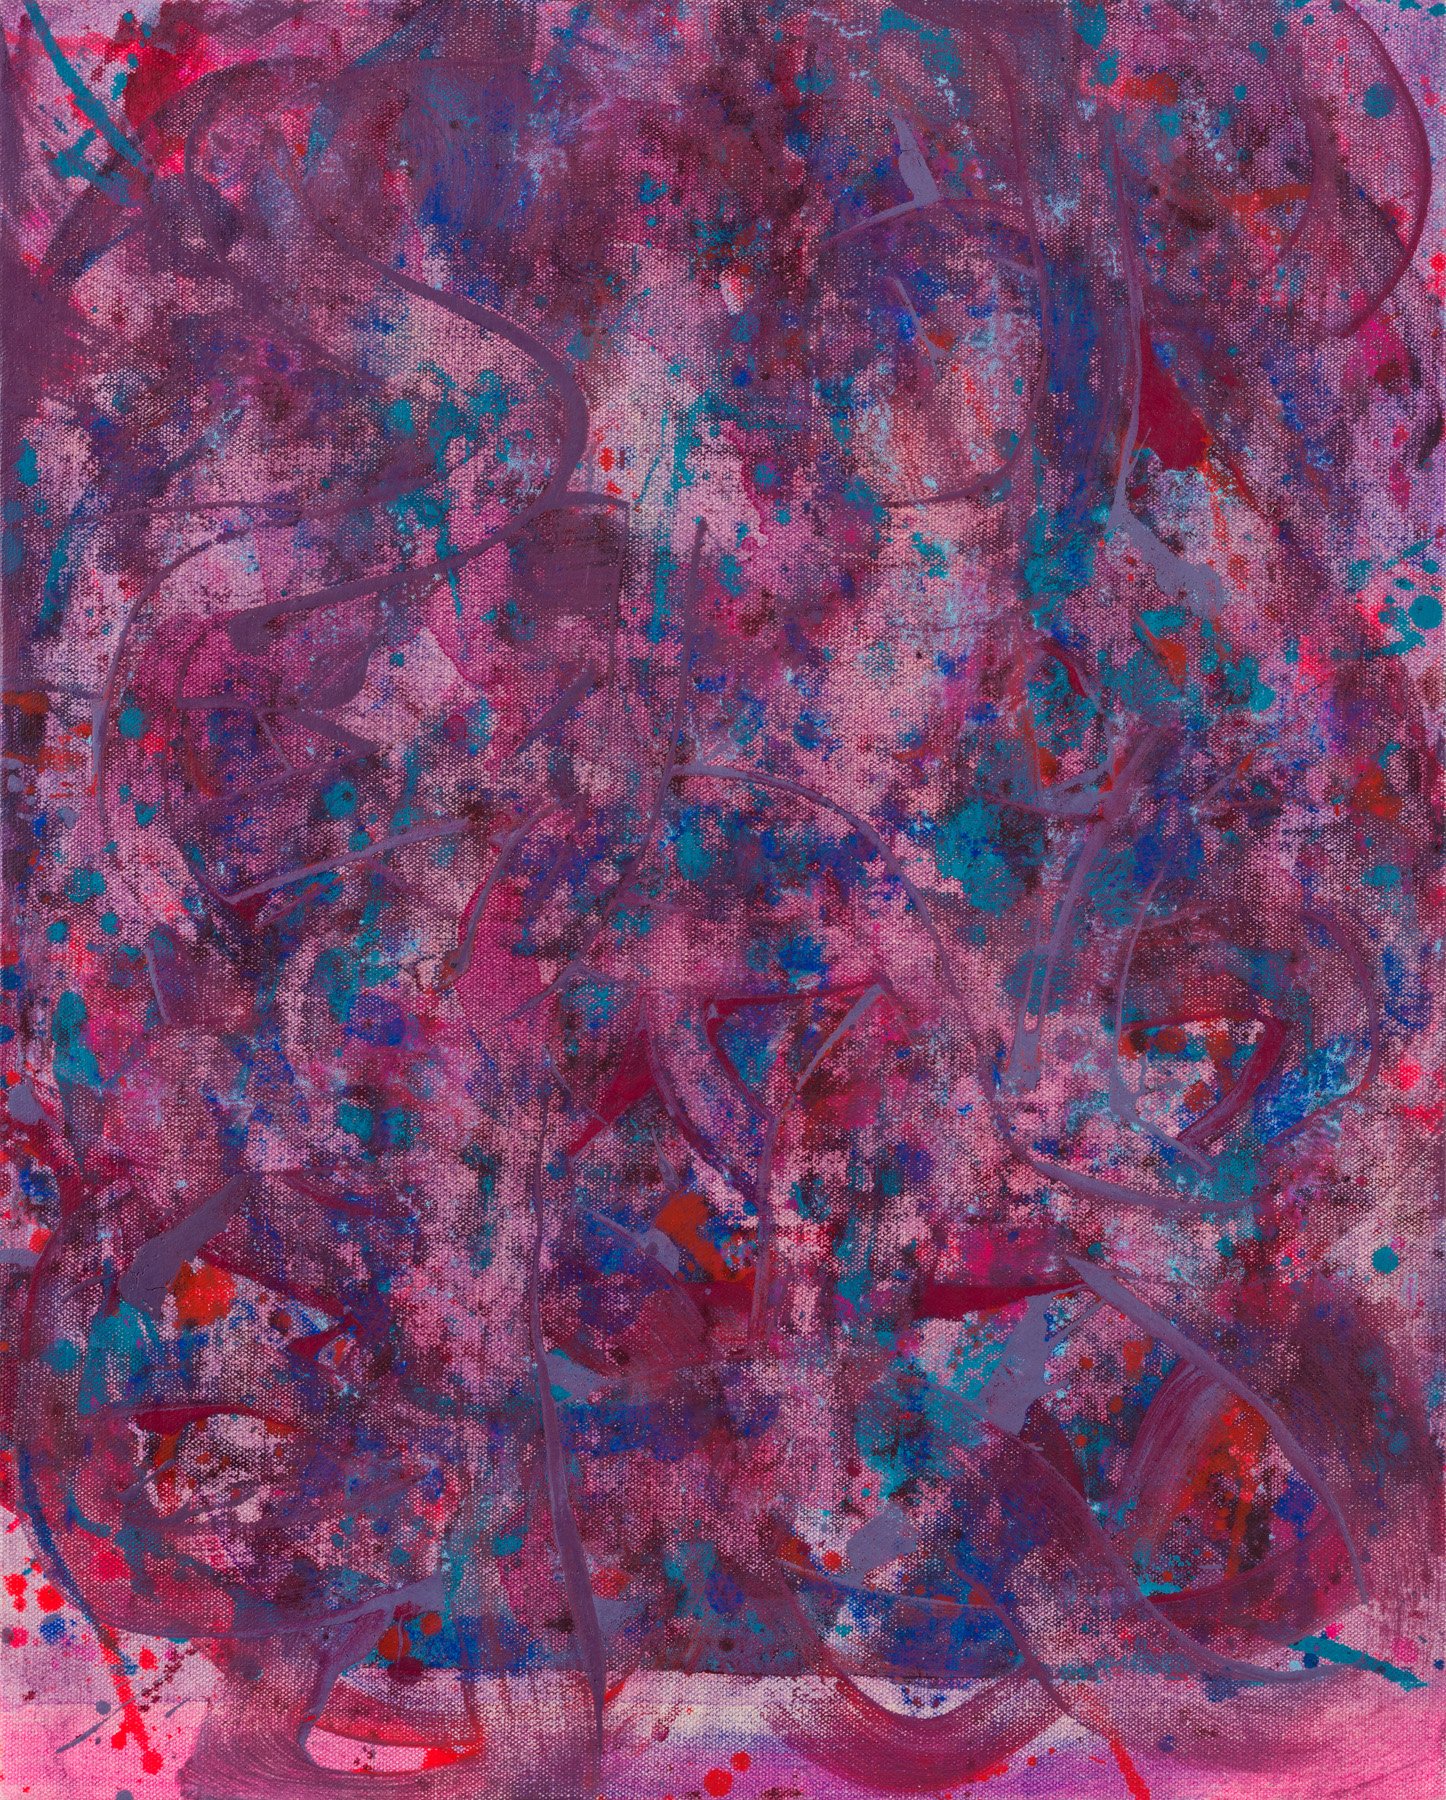  Fragments, scrubbed pink  2020  Oil, wax, pigment, water-based binders on canvas  50 x 40 cm 